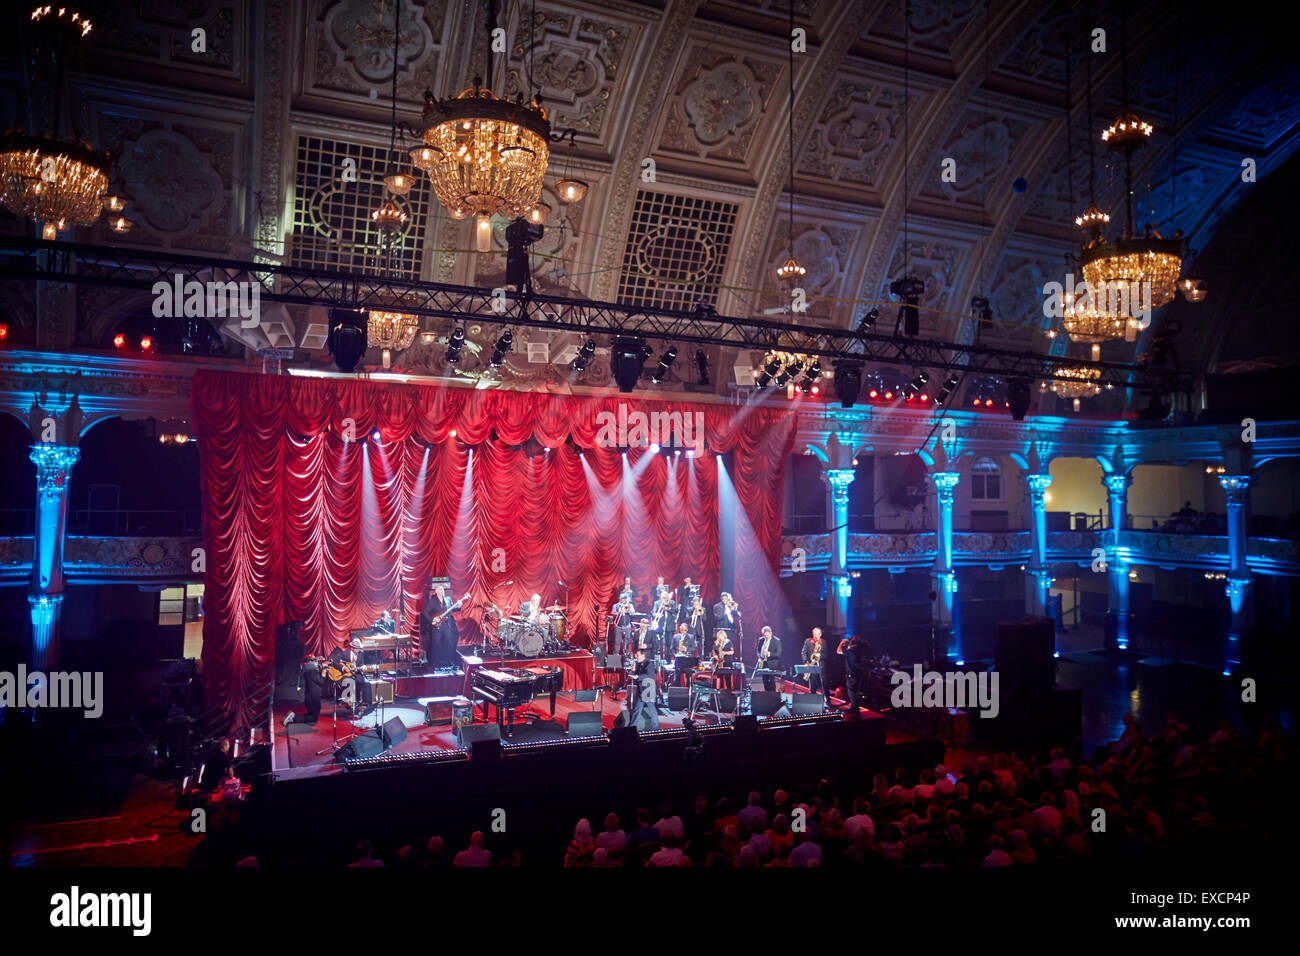 Jools Holland  Big band event at Blackpool's Winter Garden for  BBC television show   On stage at piano ball room interior stage Stock Photo